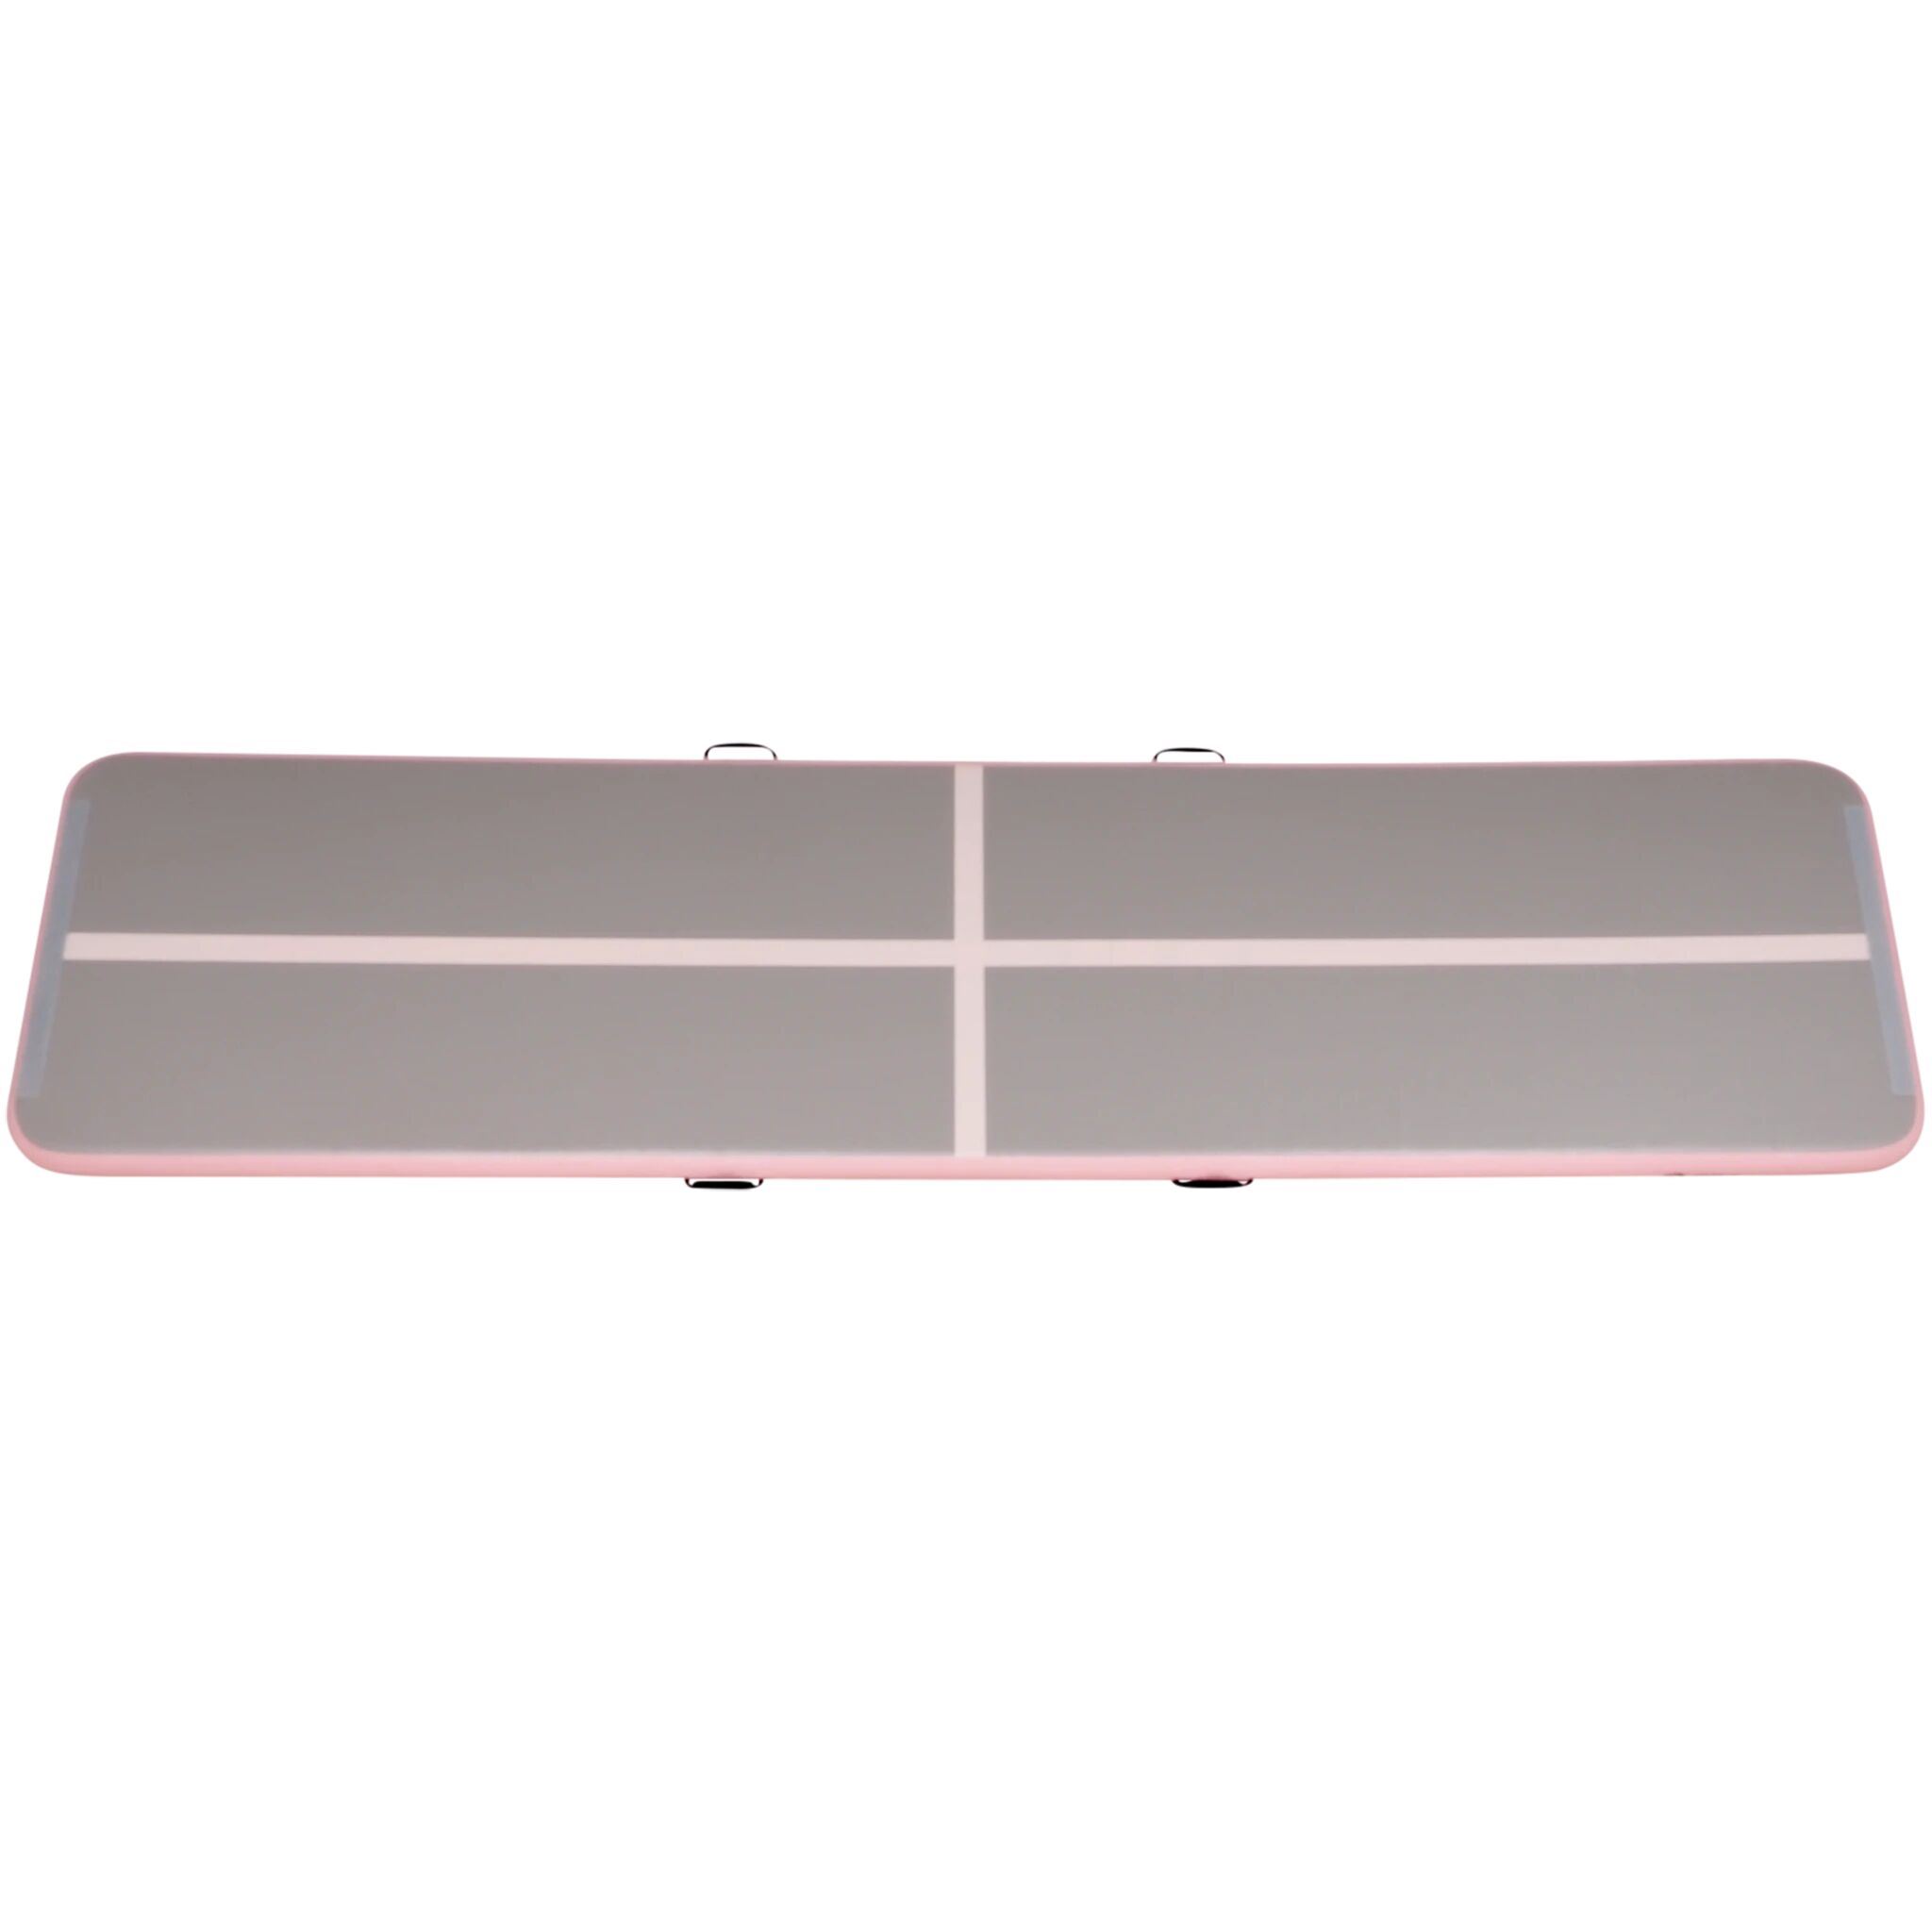 Abilica Airtrack Home 400 Grey/Pink 10cm Grey/Pink